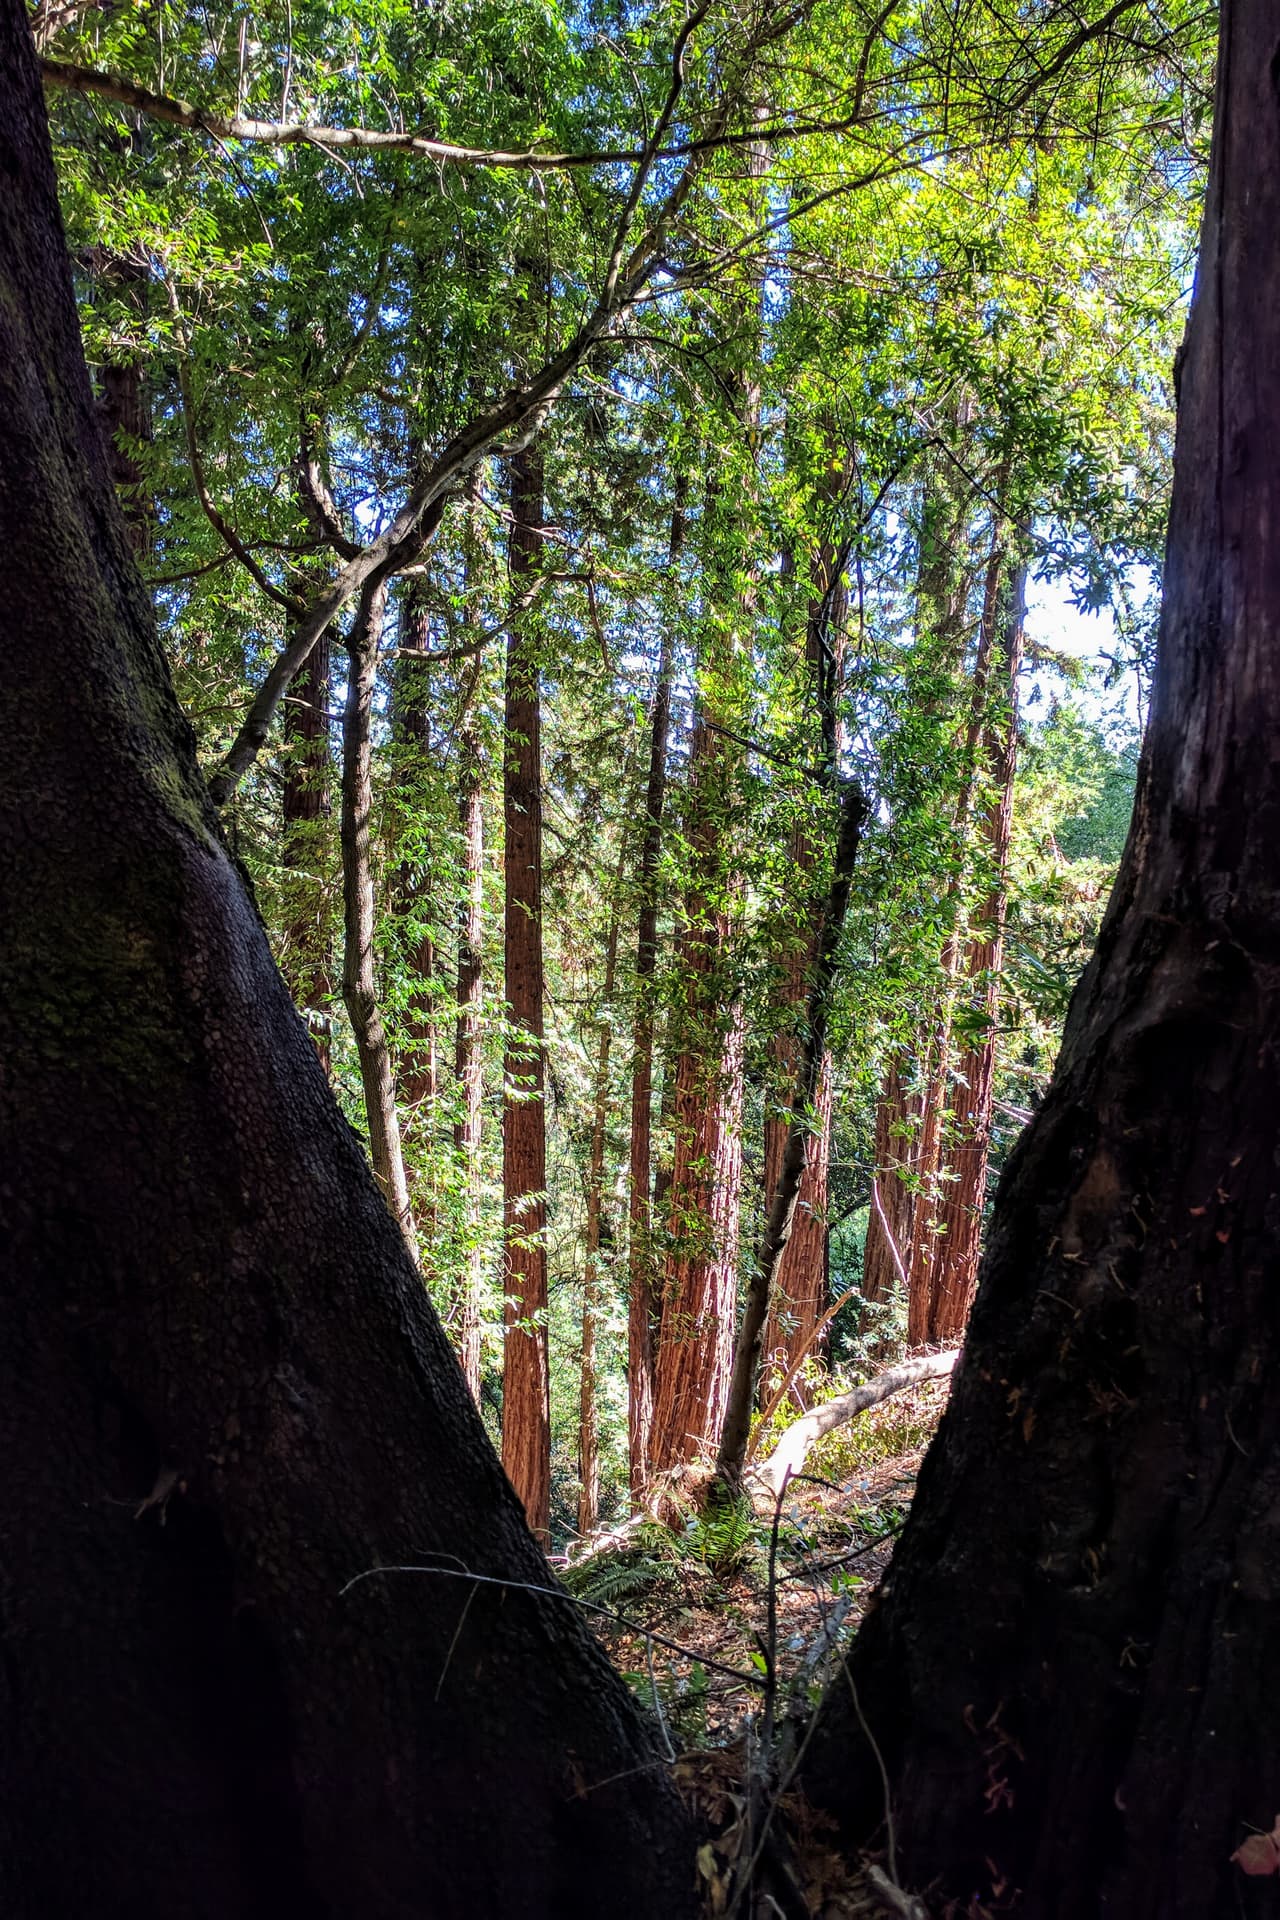 A redwood forest, seen through the narrow gap between two foreground trees.